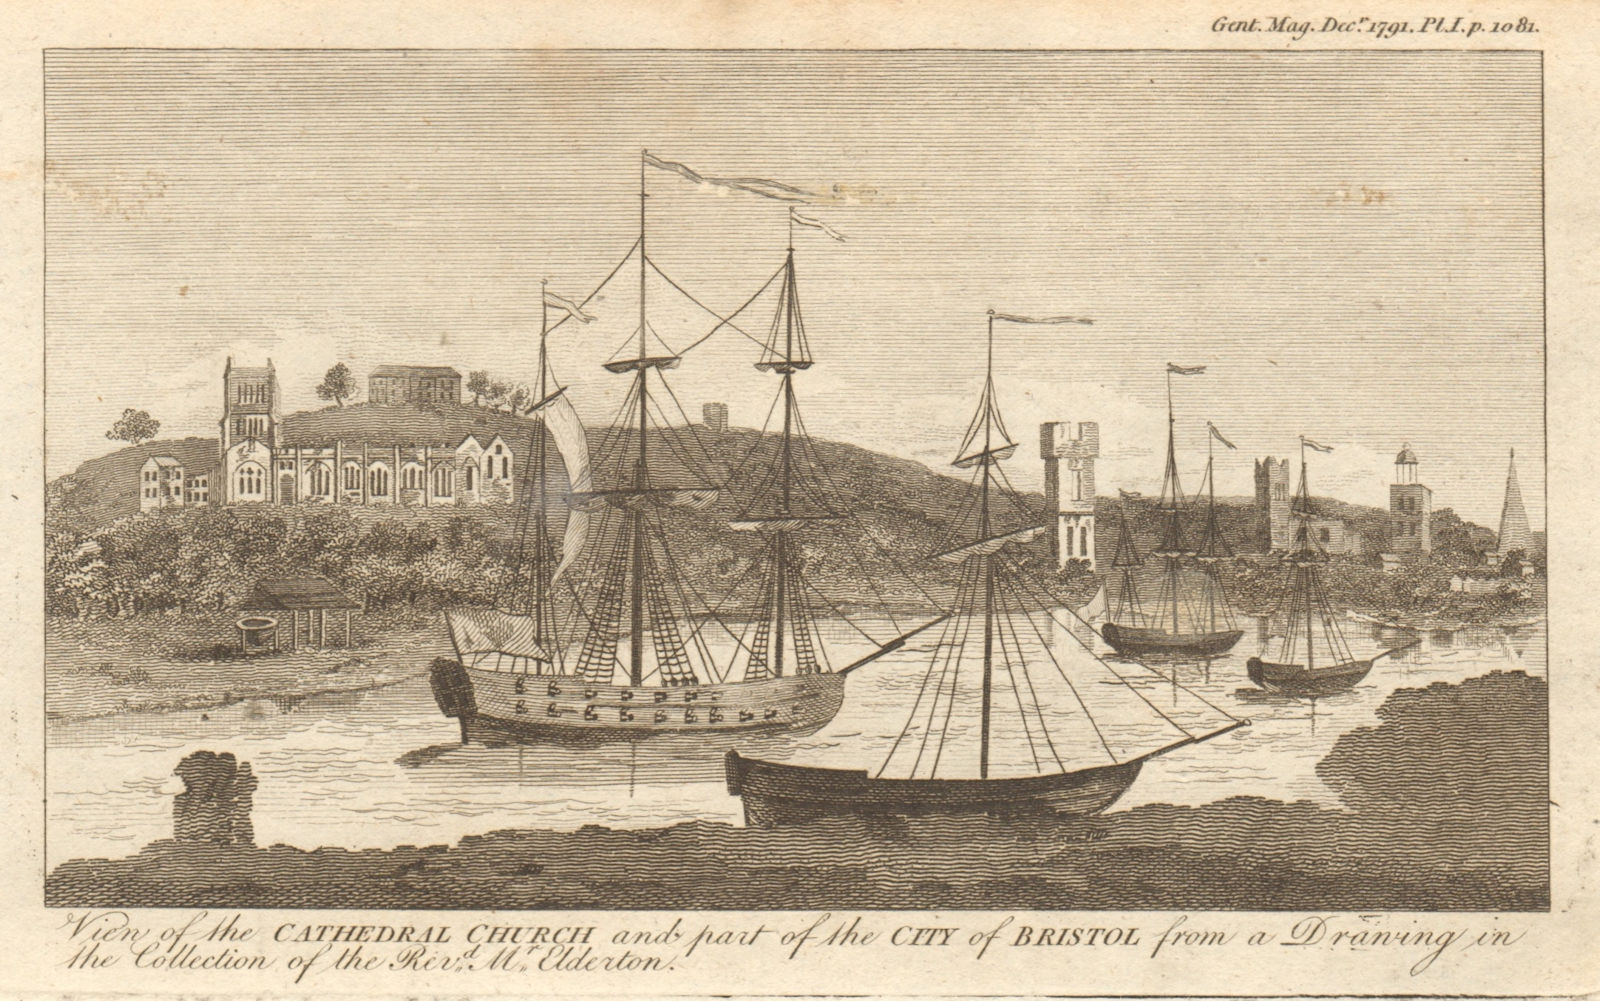 View of the Cathedral Church and part of the City of Bristol 1791 old print